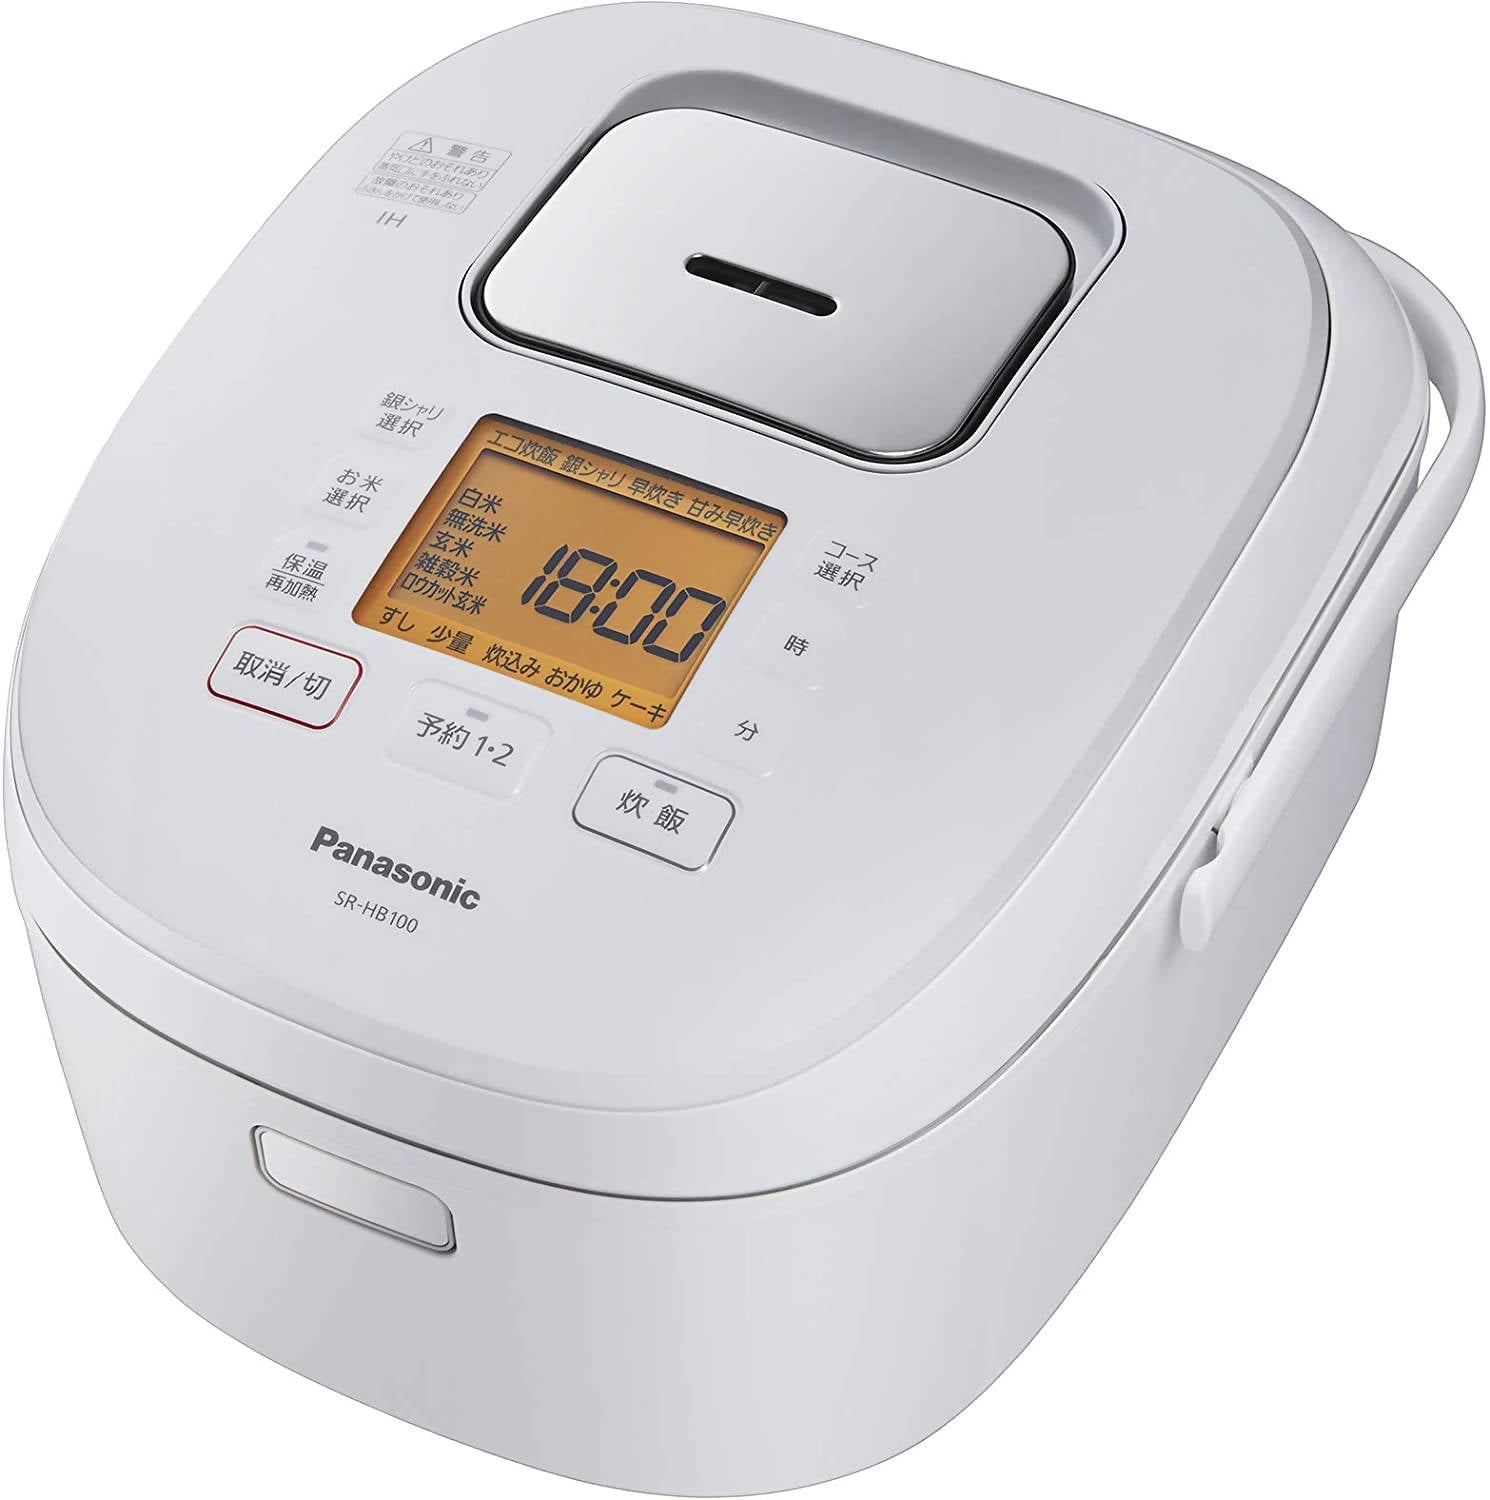 Panasonic SR-HB100-W 5-Stage IH (Induction Heating) Rice Cooker – 5.5 Go  Capacity – White